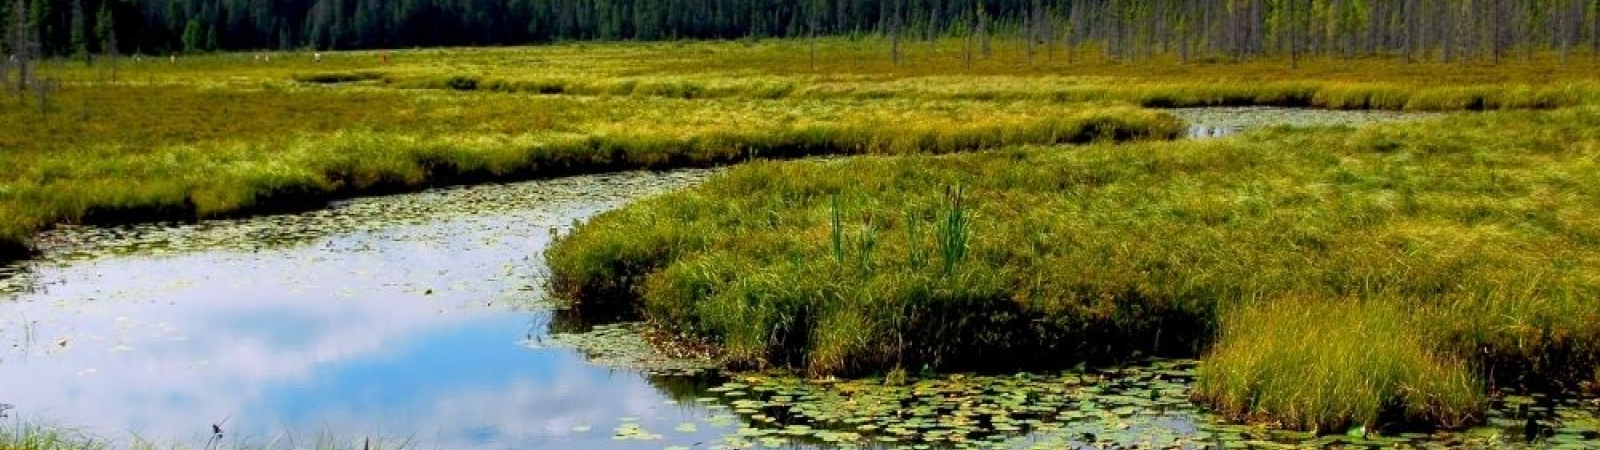 A photo of a wetland with lily pads and tall green grasss on a sunny day.